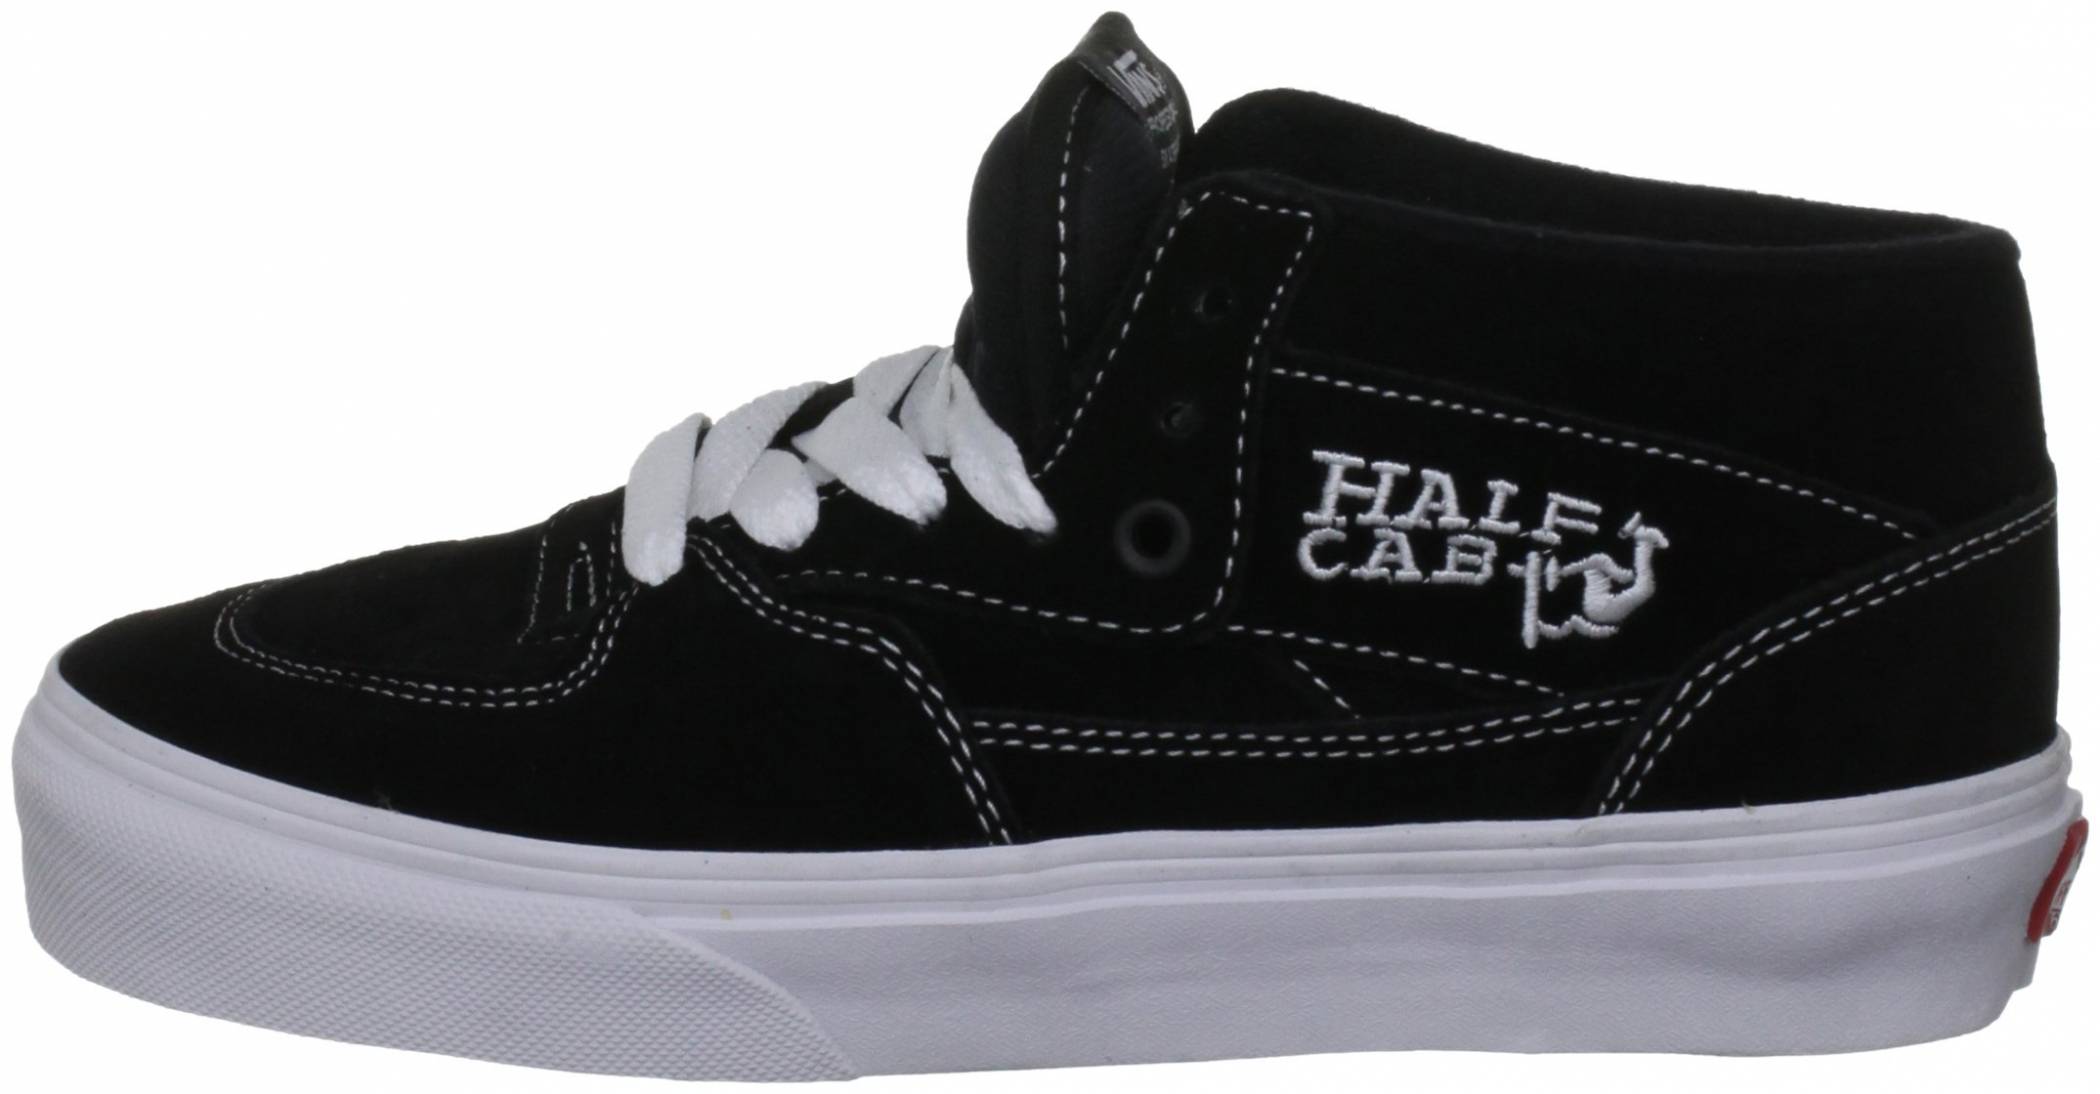 Only $62 + Review of Vans Half Cab 